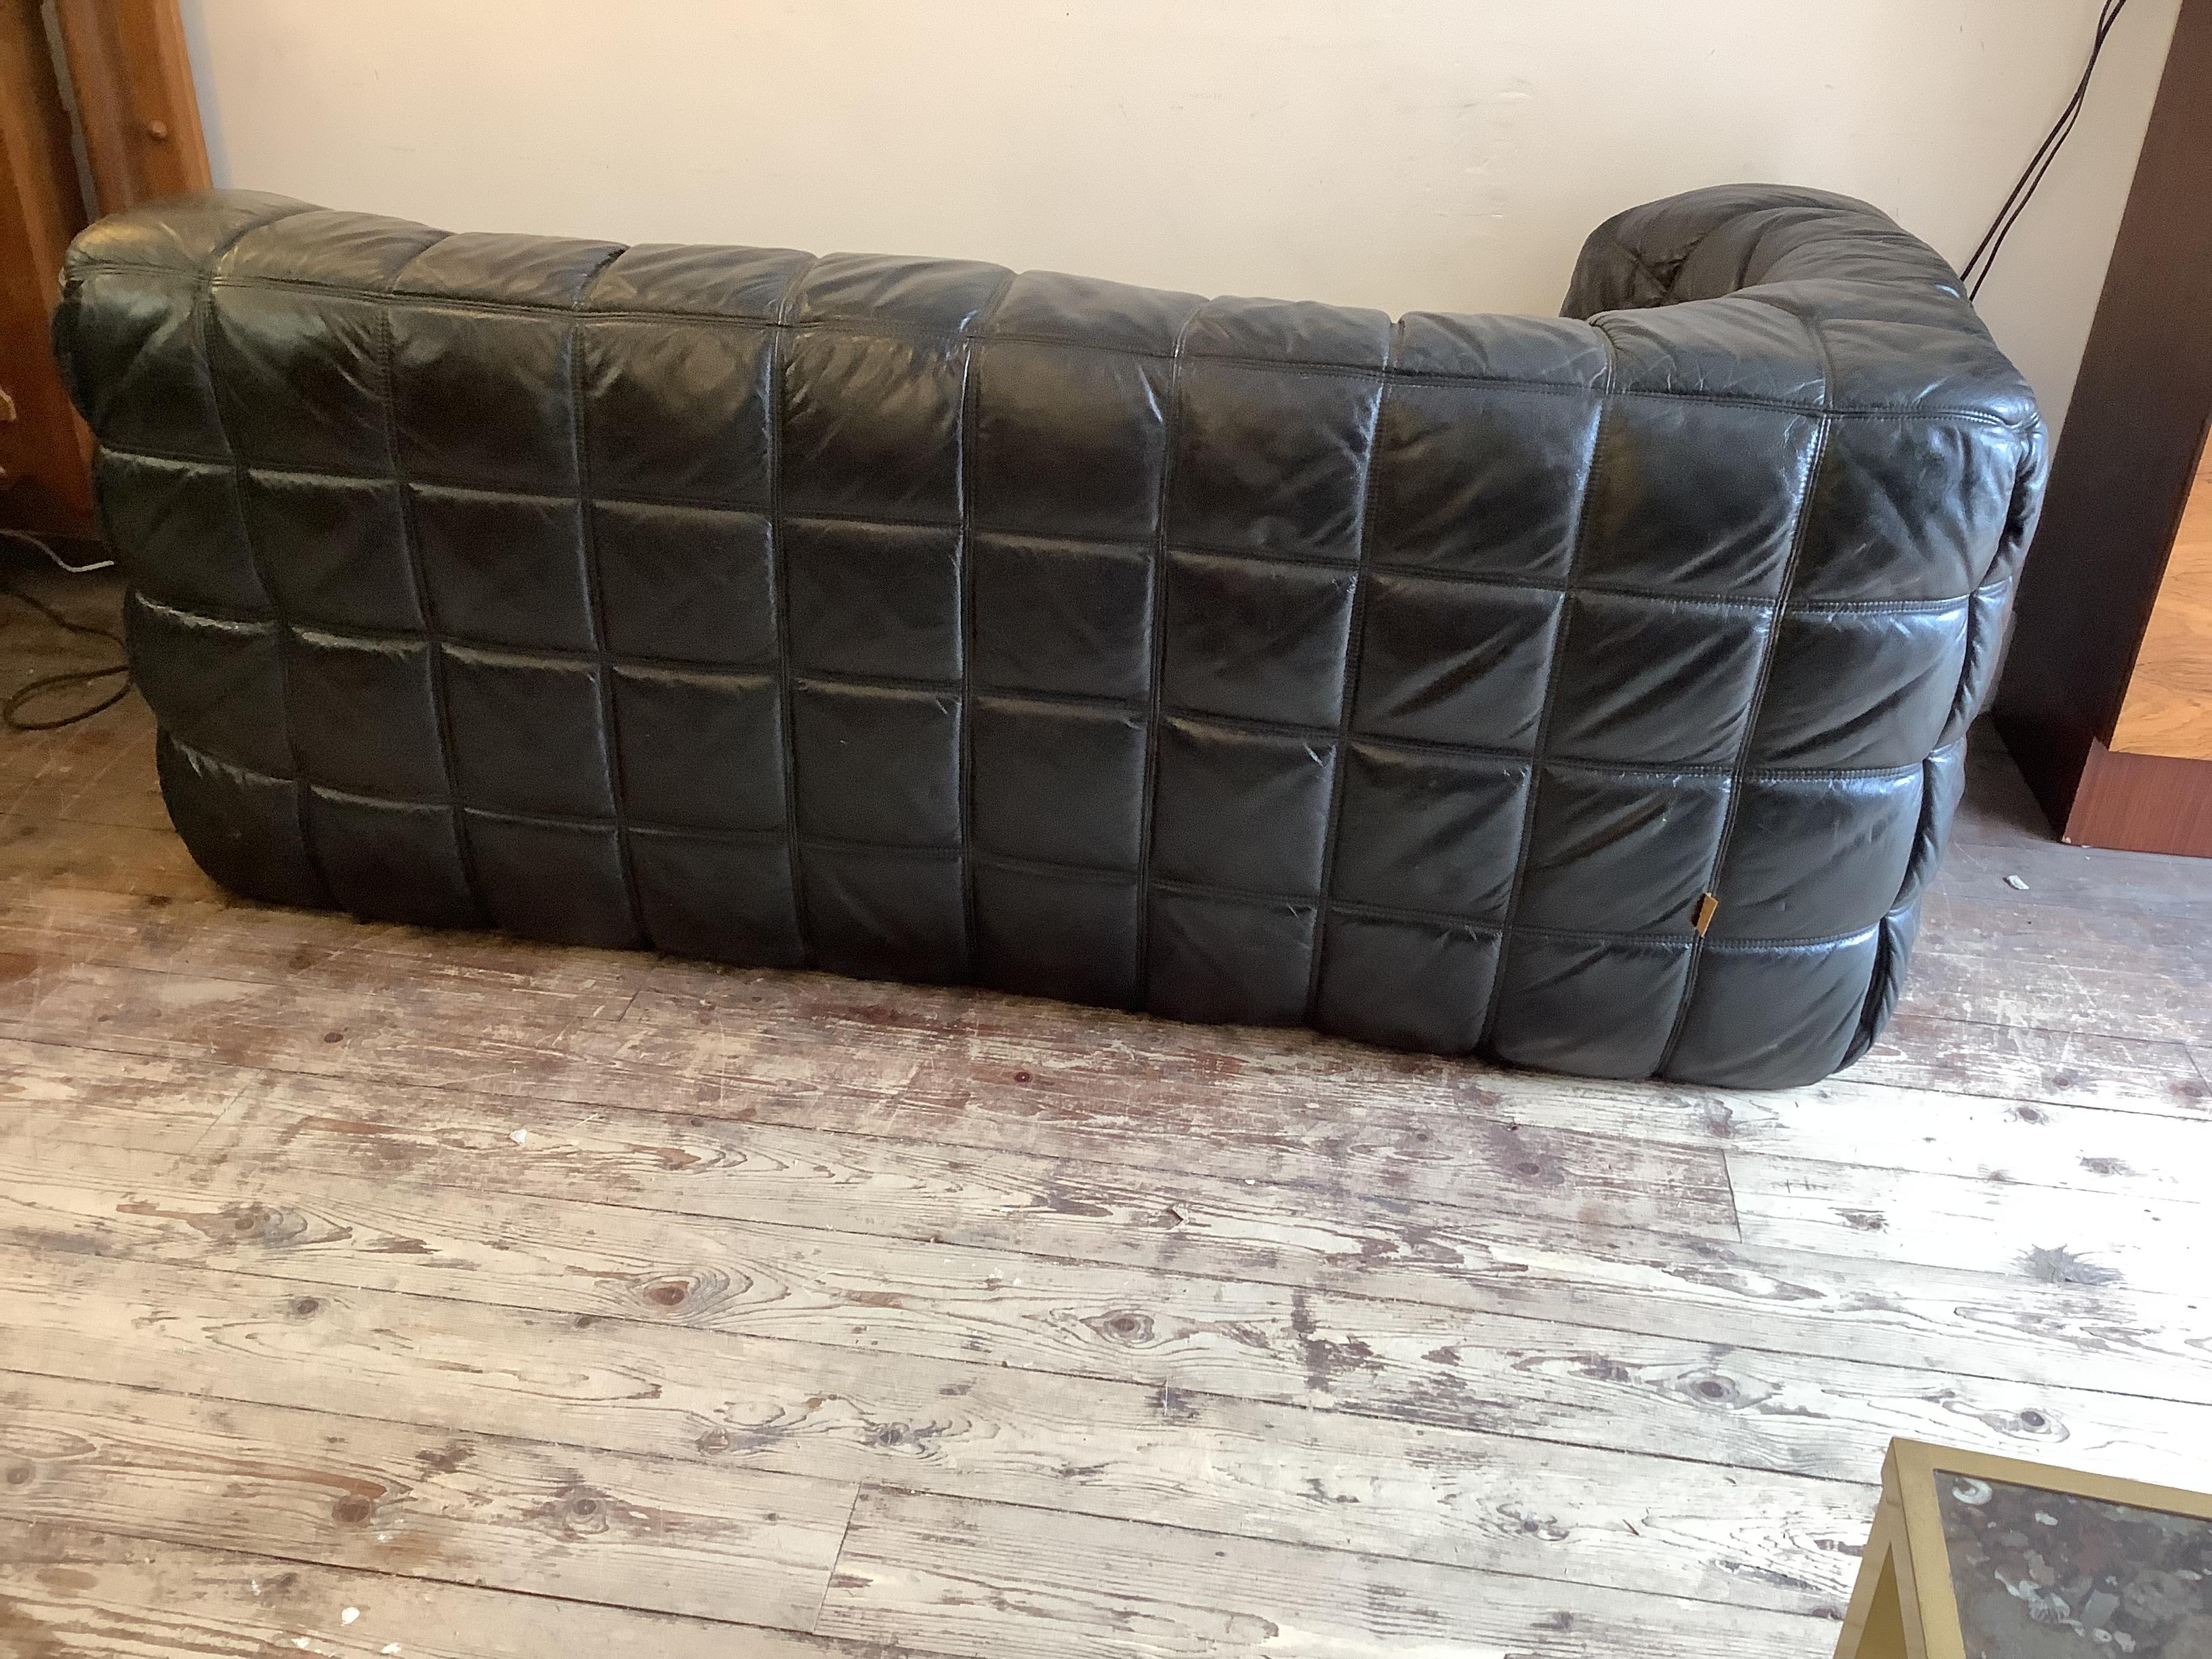 Super comfortable thick black leather 2 seater sofa.
Designed by Michel Ducaroy for Ligne Roset in 1976.
A Minimalist and powerful line. The seat element is 
Made of foam The Sofa is in good condition, there are slight traces of wear in places